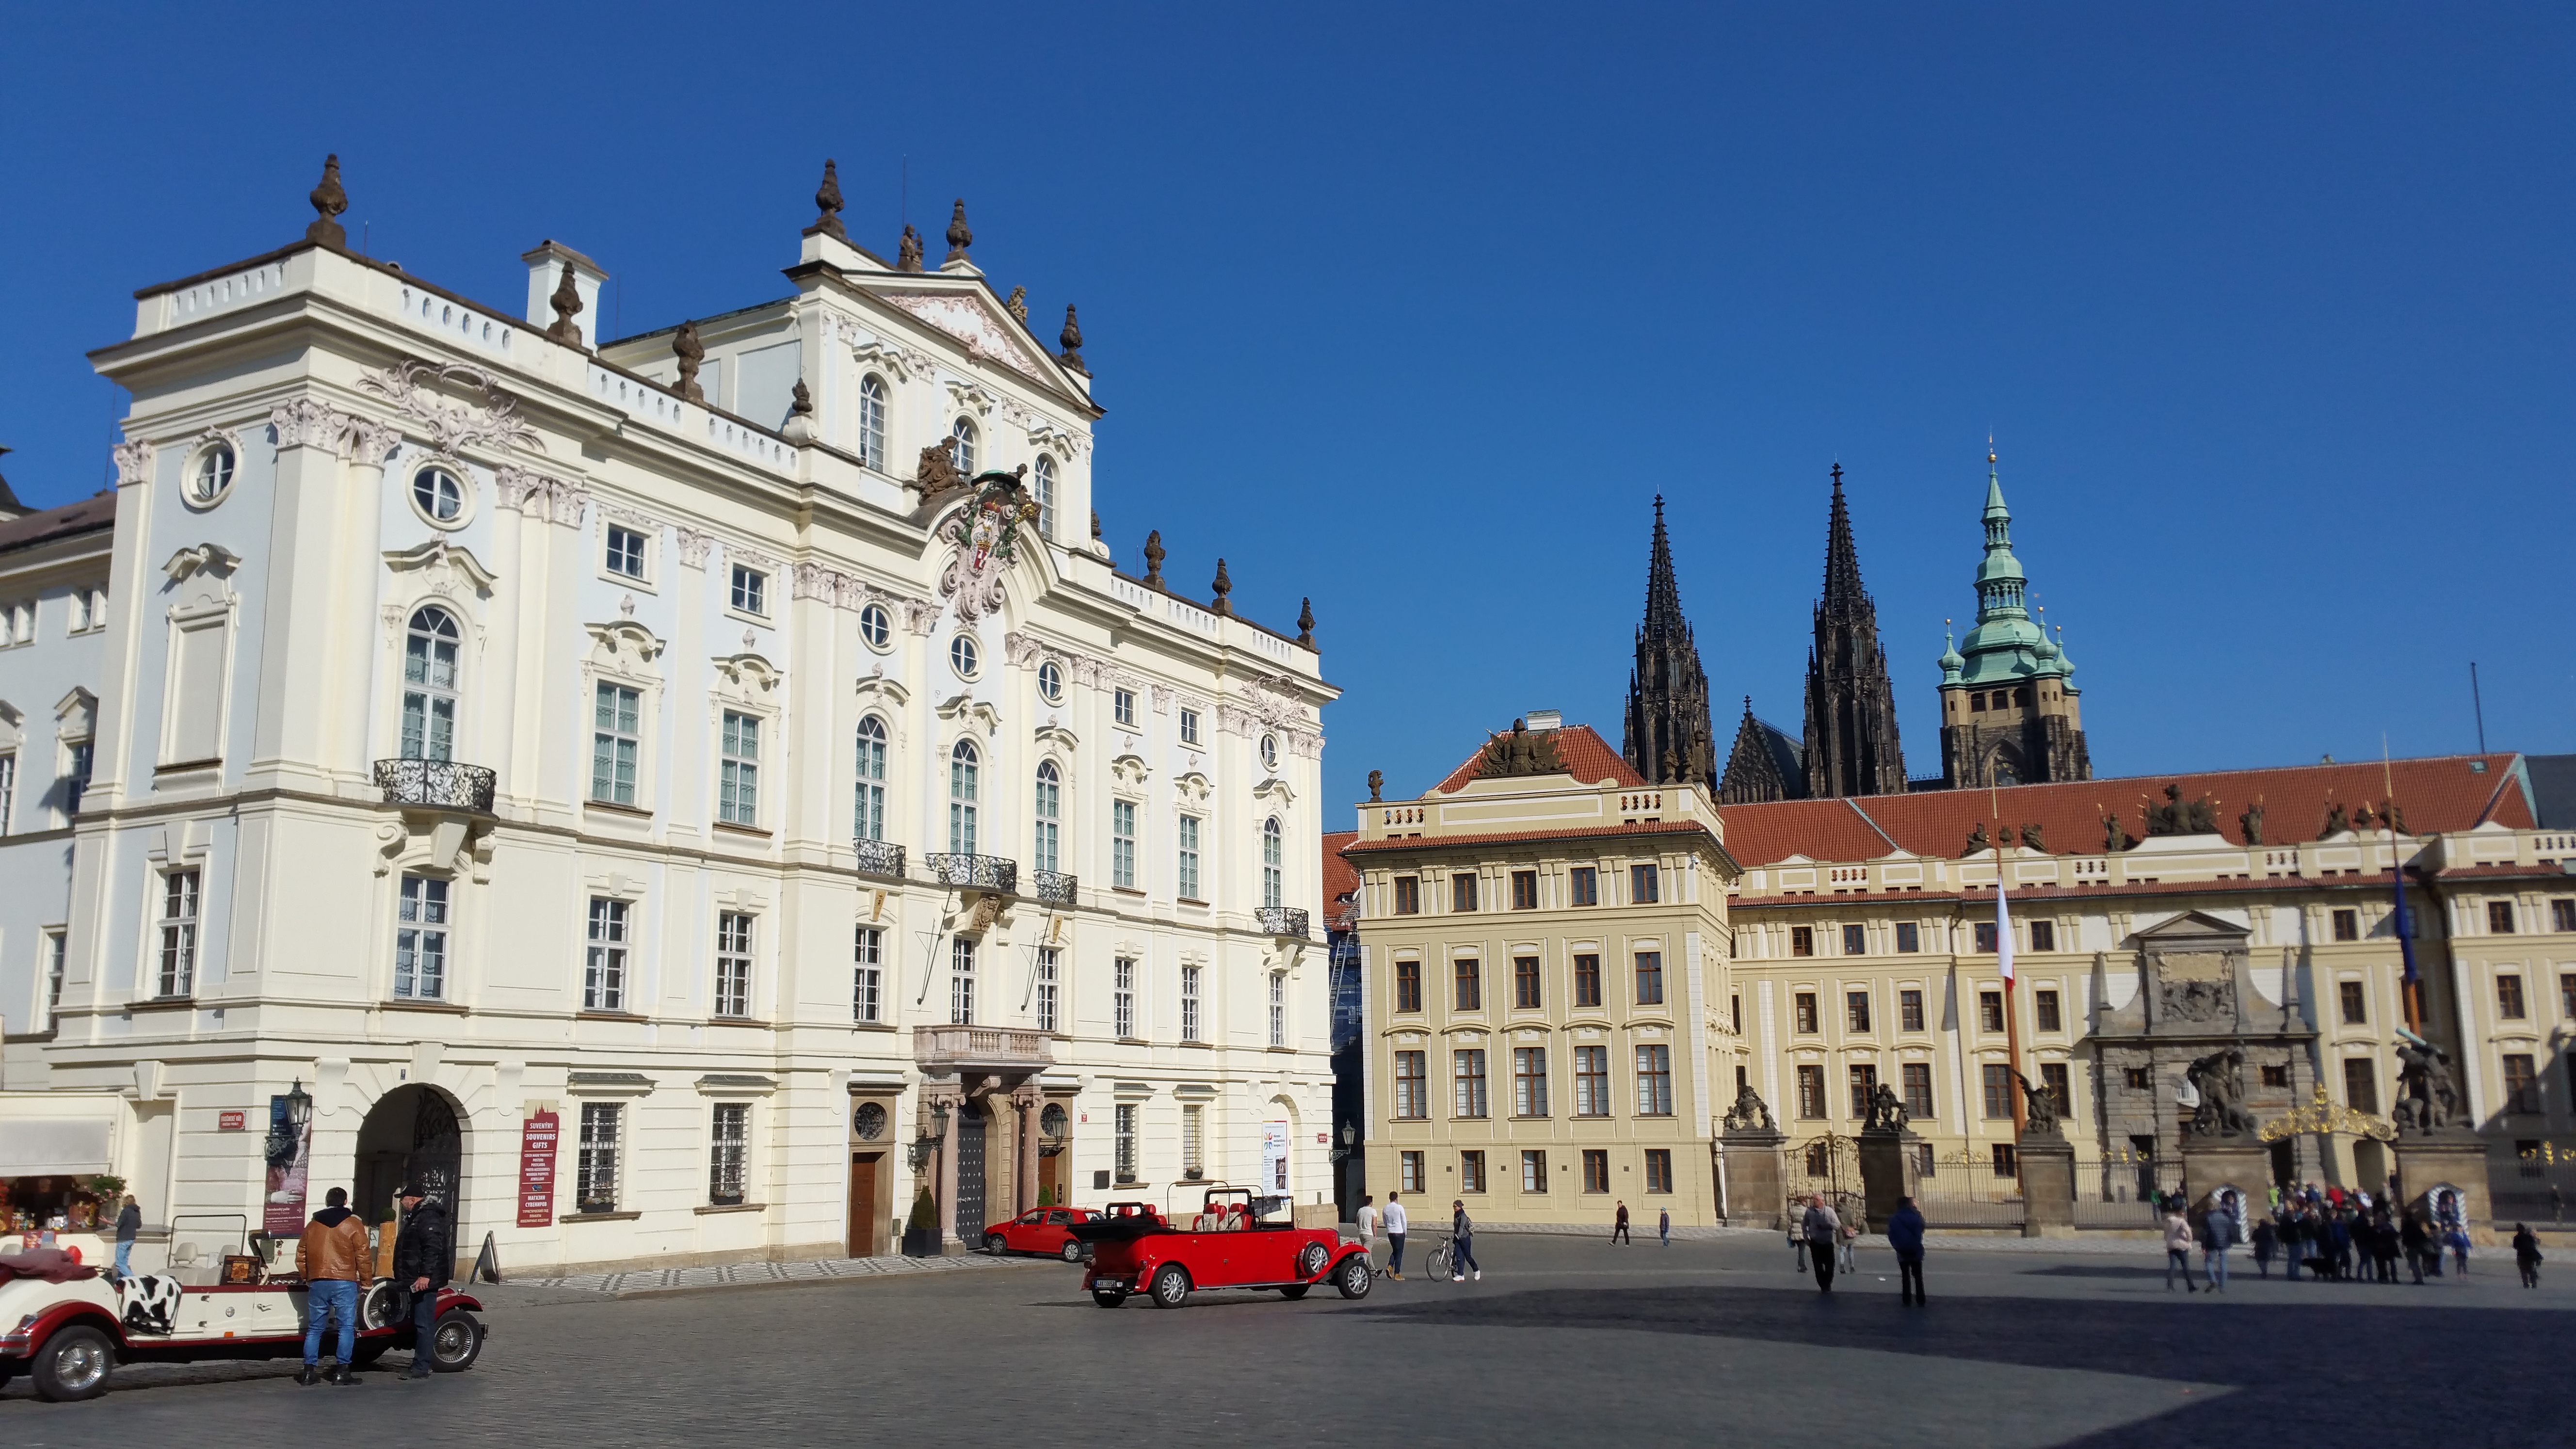 Photos from a day trip to Prague